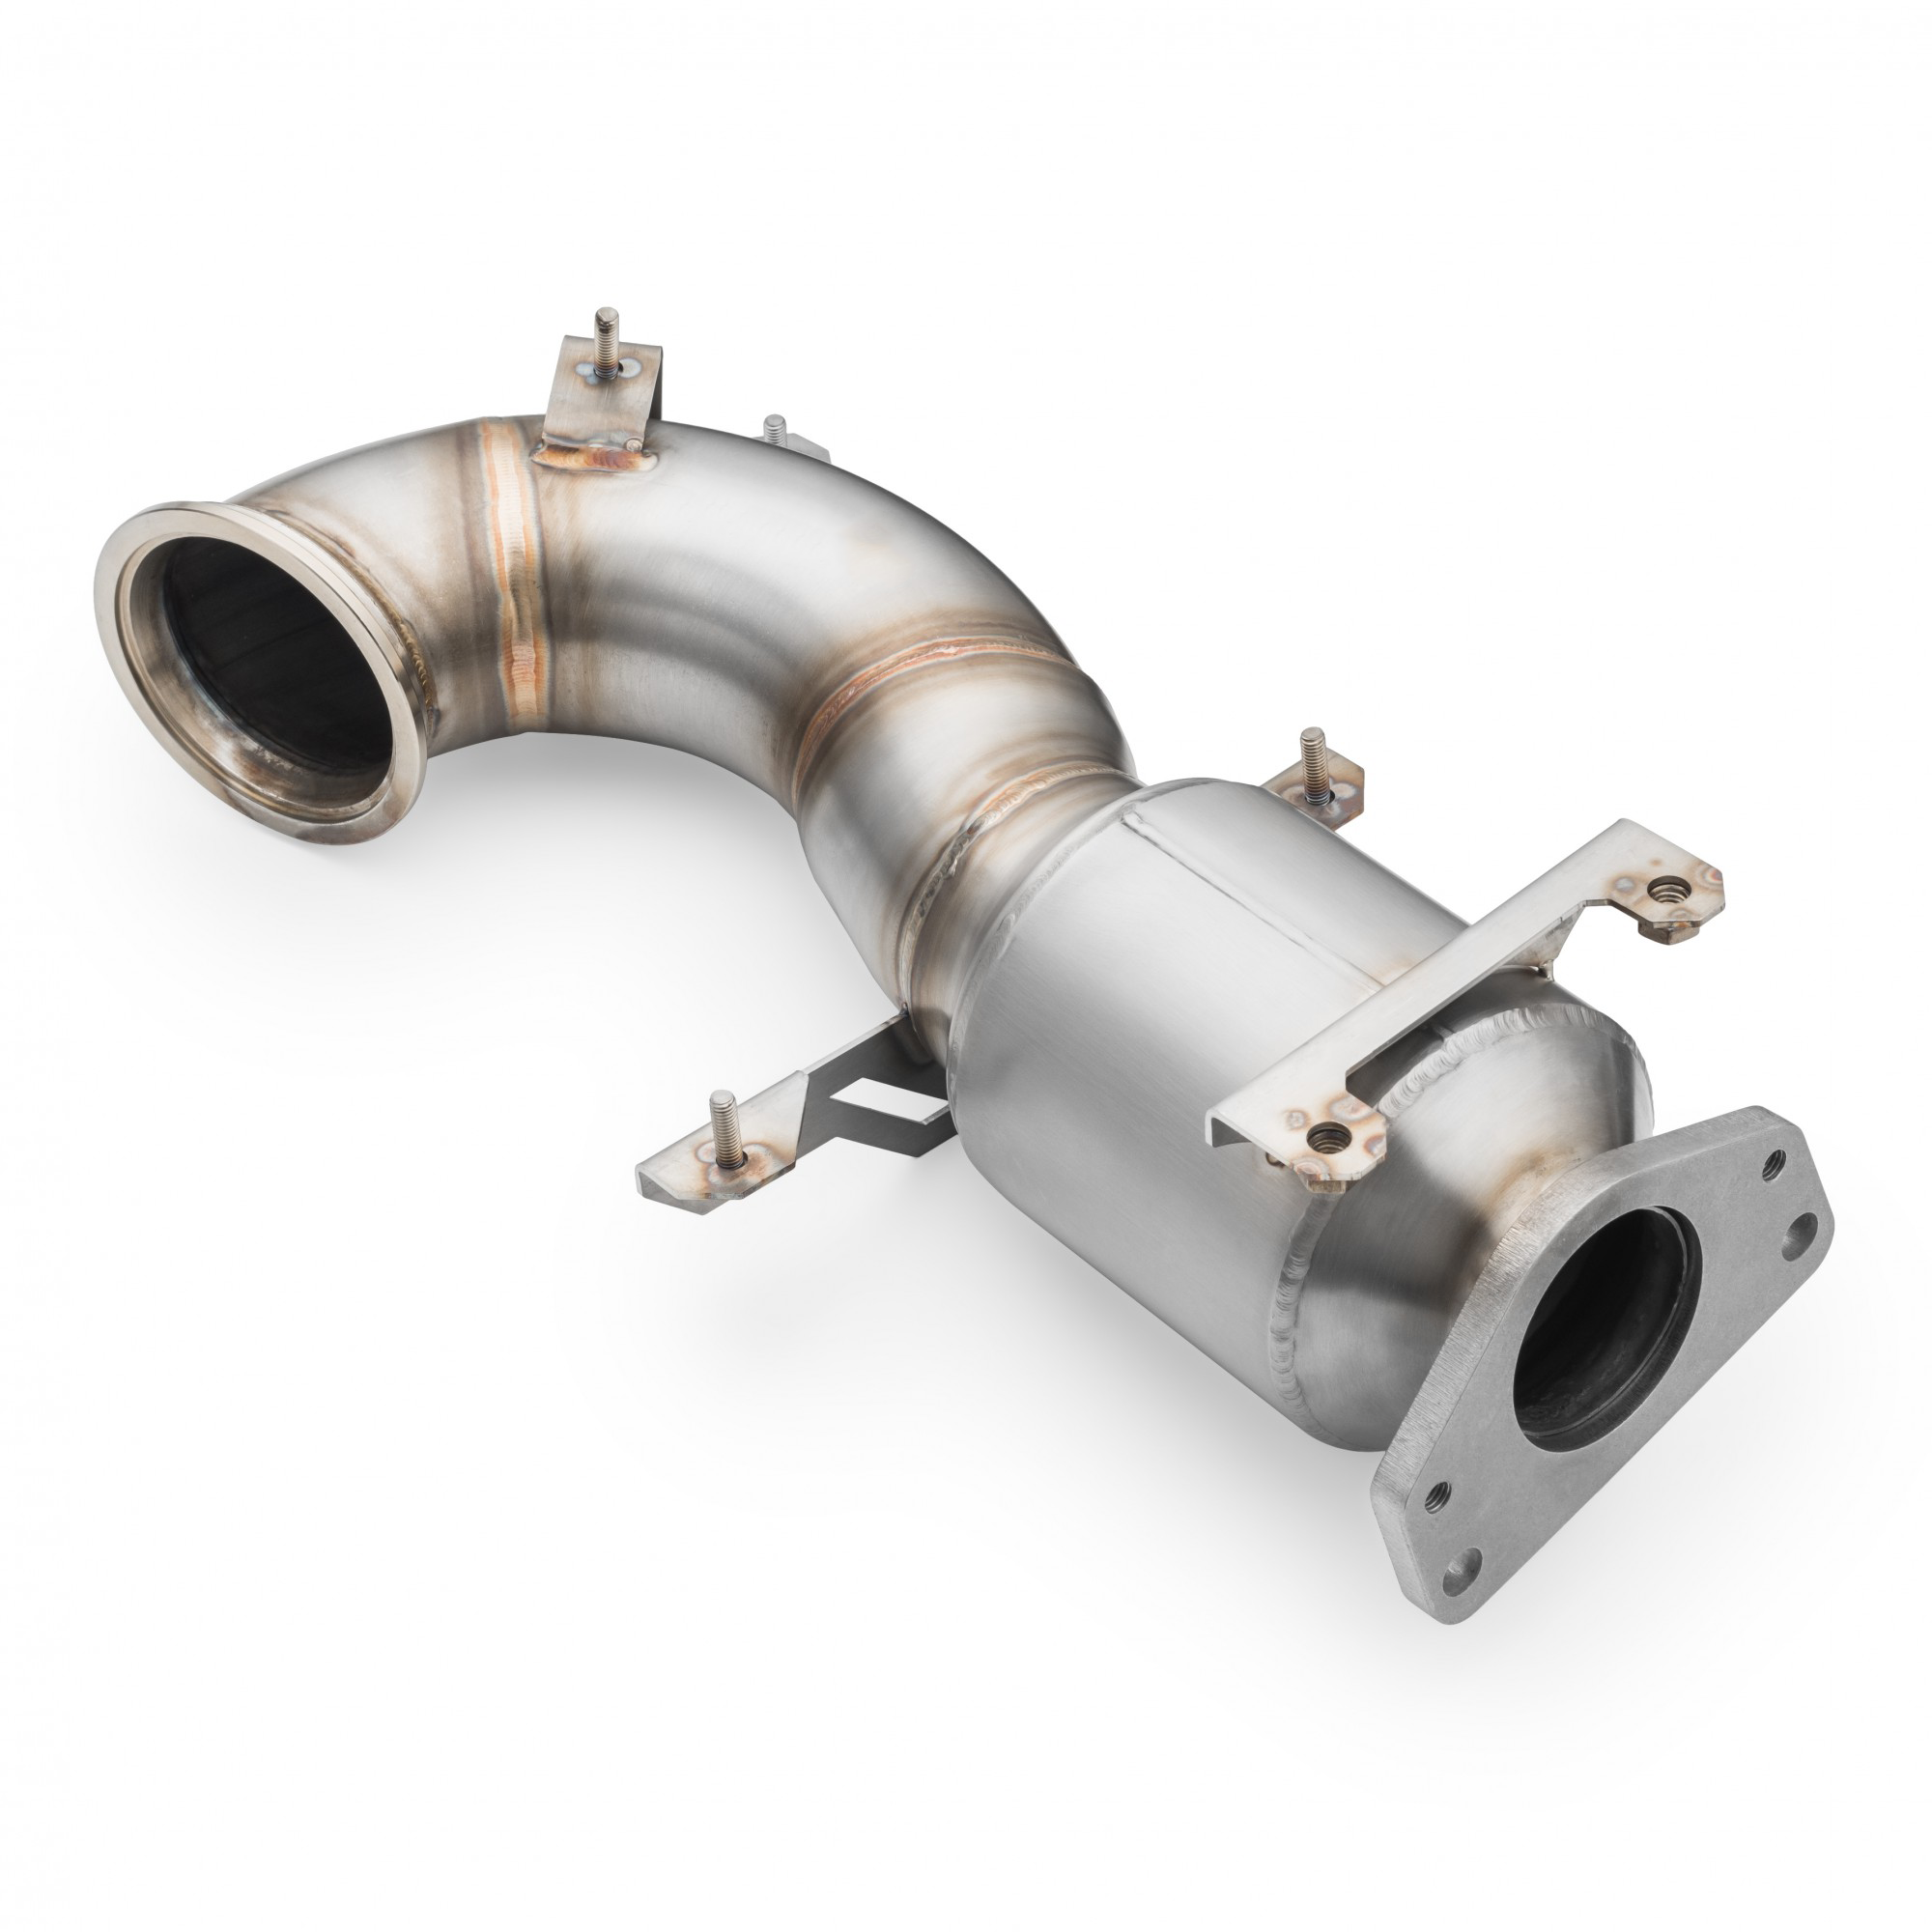 TurboLogic Downpipe Abarth 500 / Abarth 595 1.4T with catalytic converter 